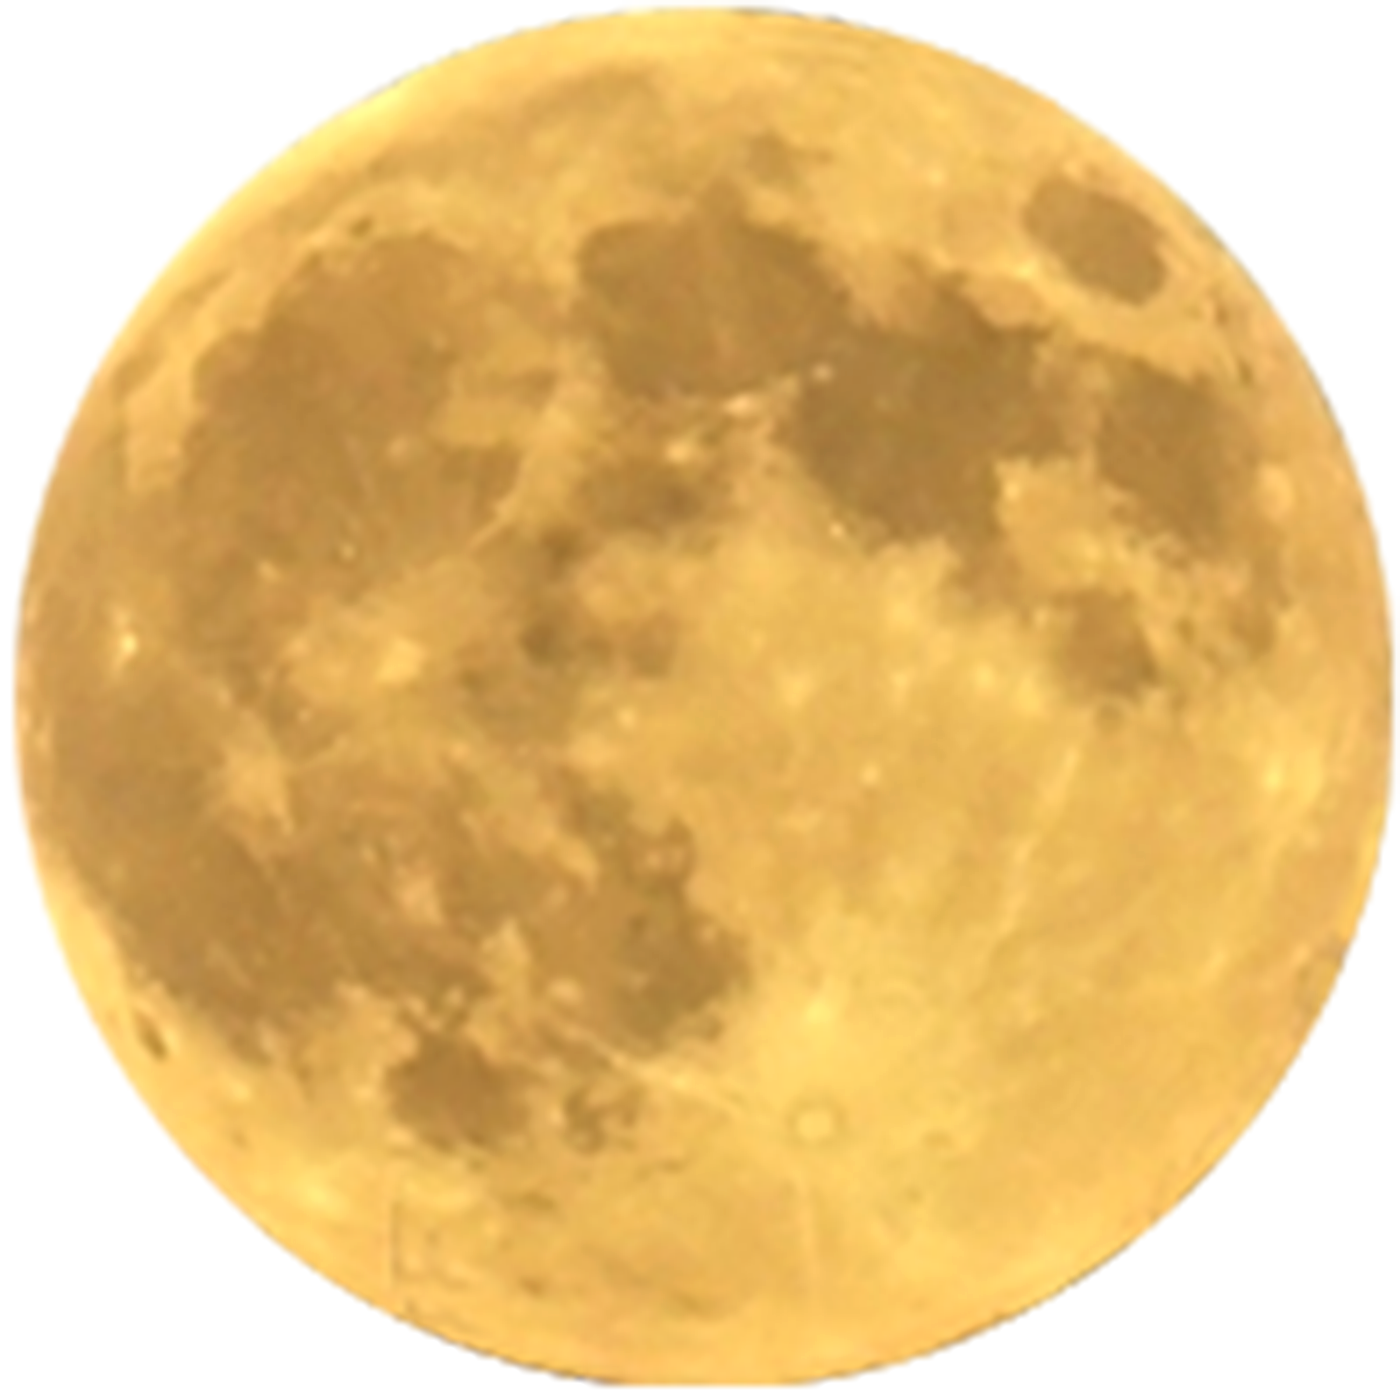 Full Moon Png Image With Transparent Background Png Arts